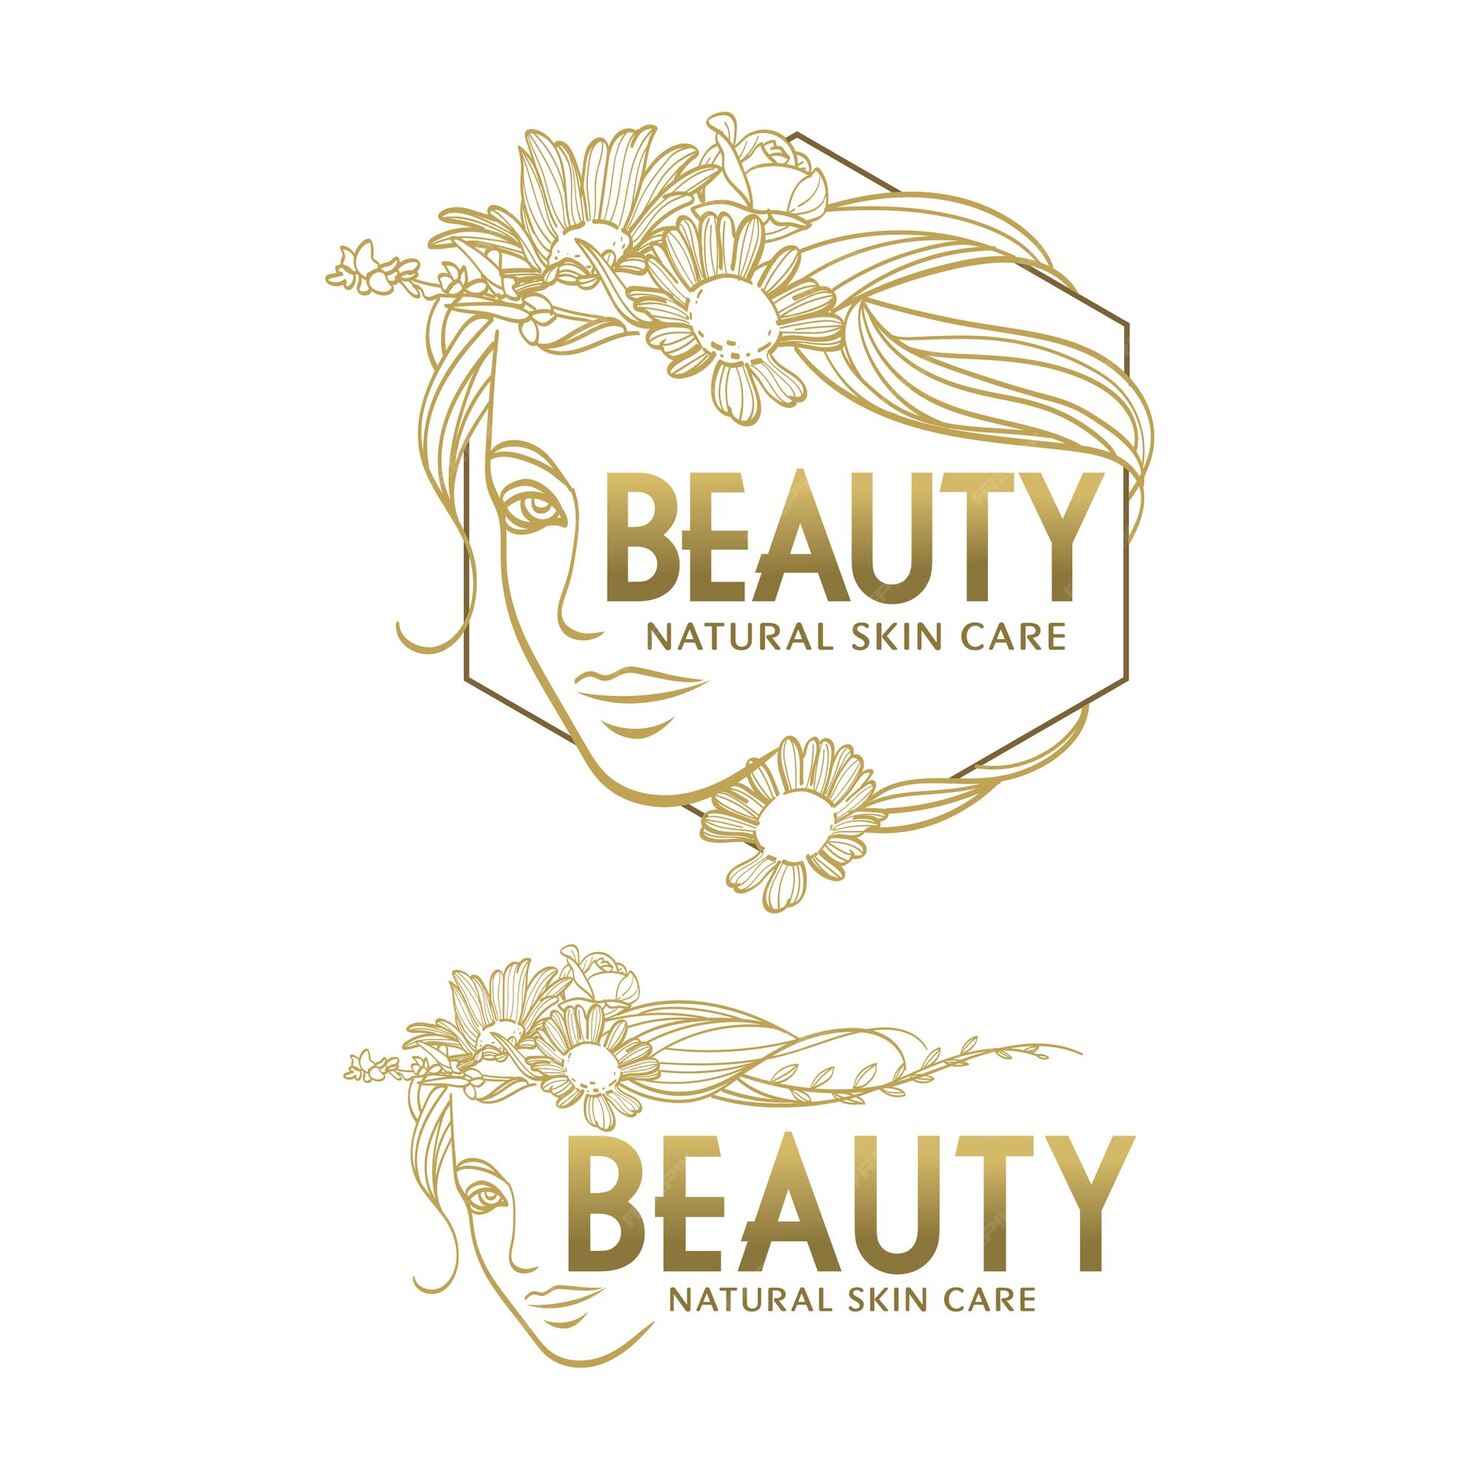 Premium Vector | Natural beauty skin care logo with woman face and floral